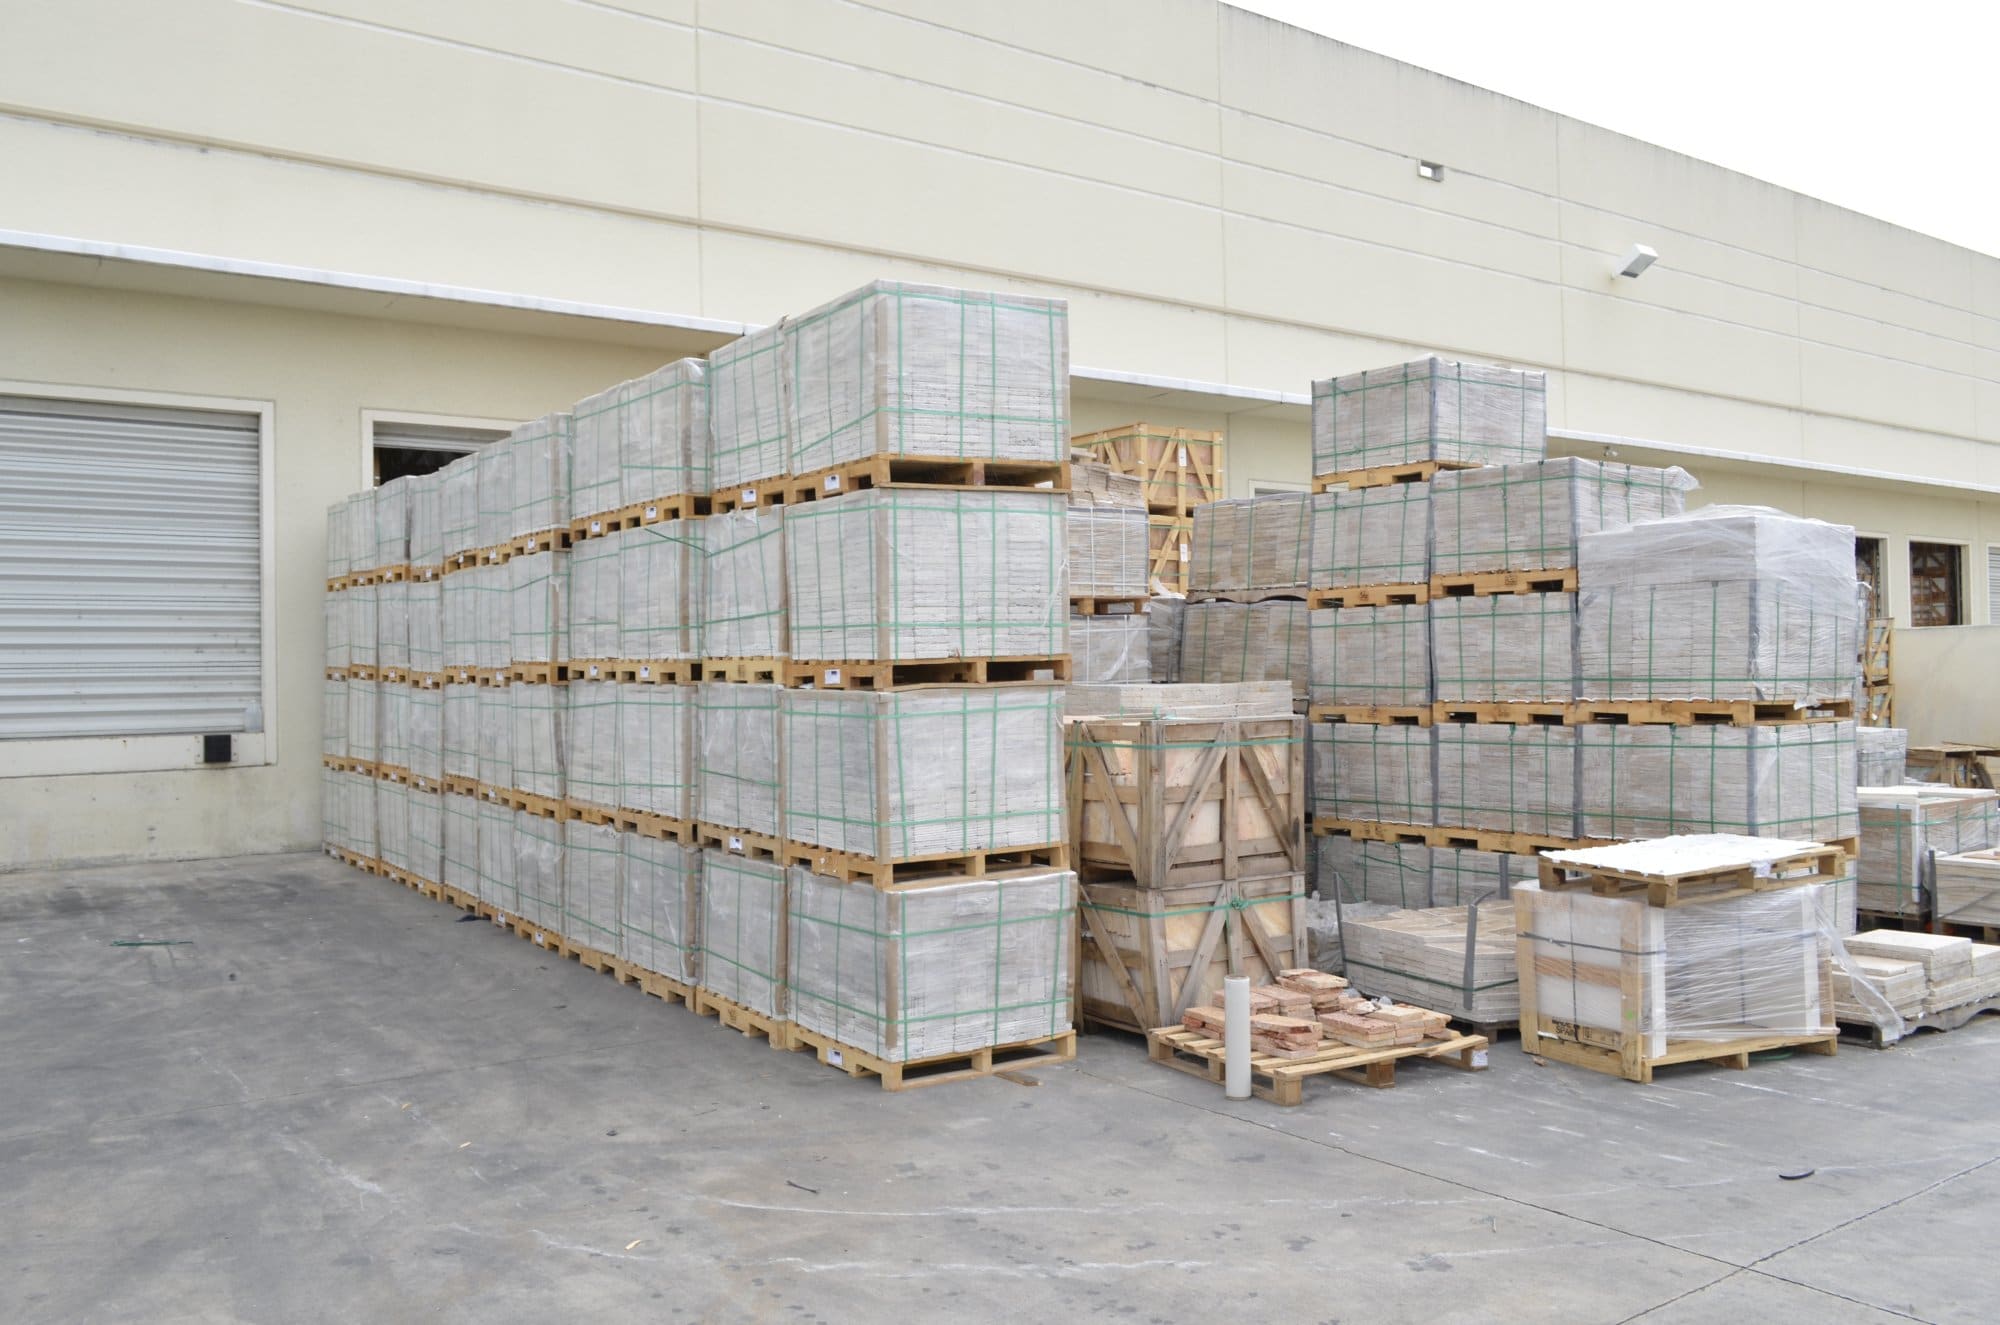 TILE STORES, Due to our contracted freight companies’ limitations